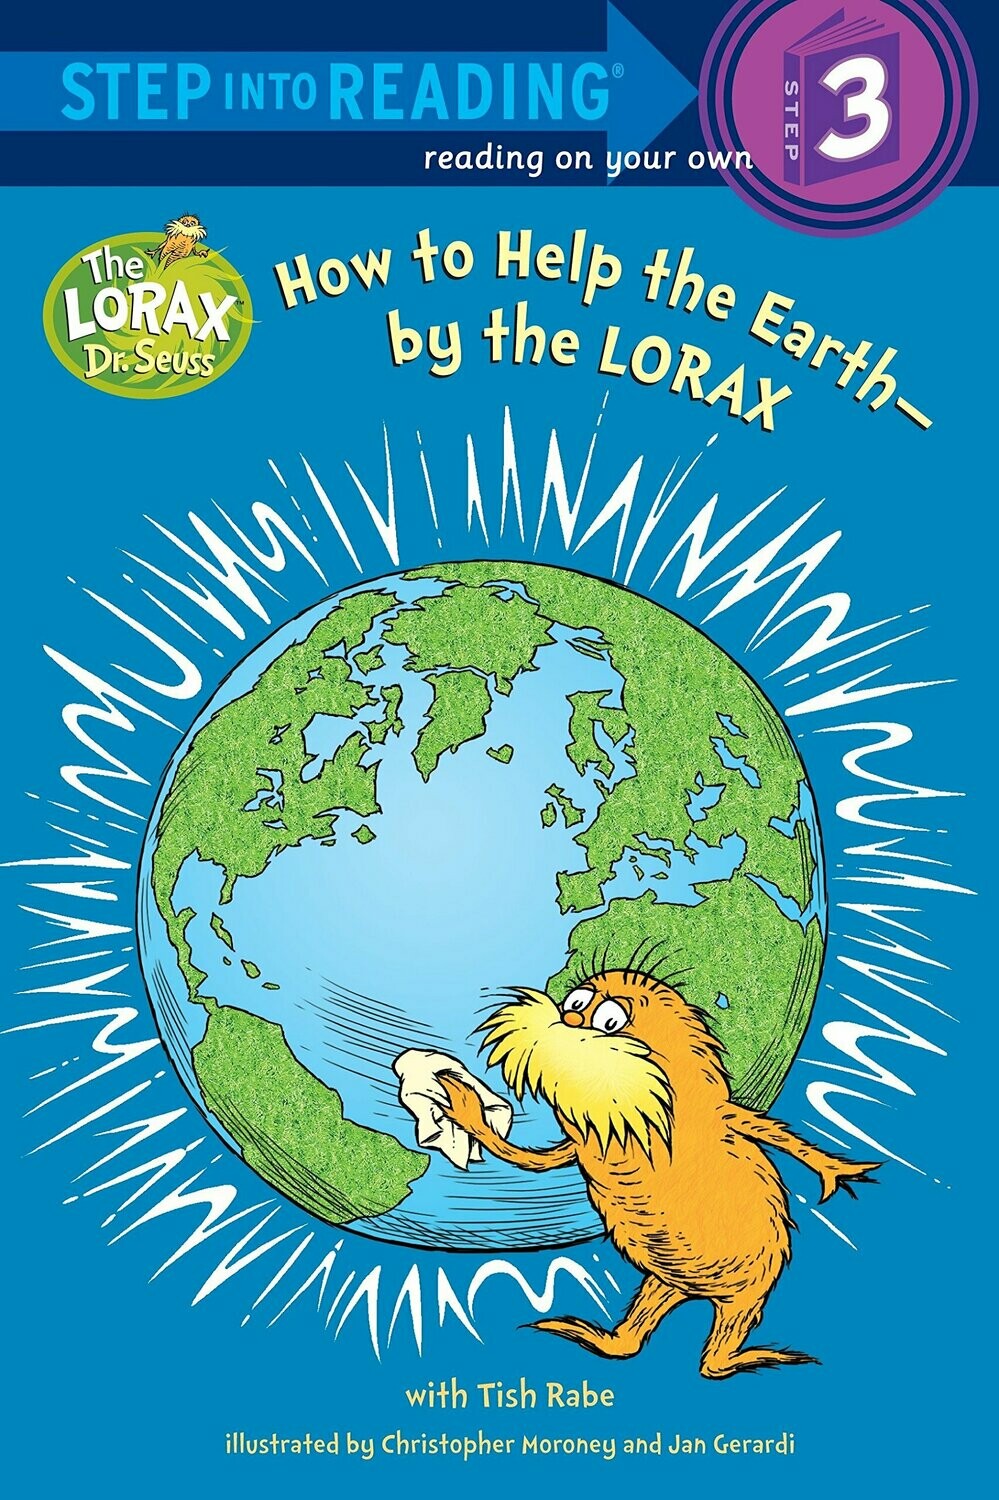 How to Help the Earth by the Lorax - Step 3